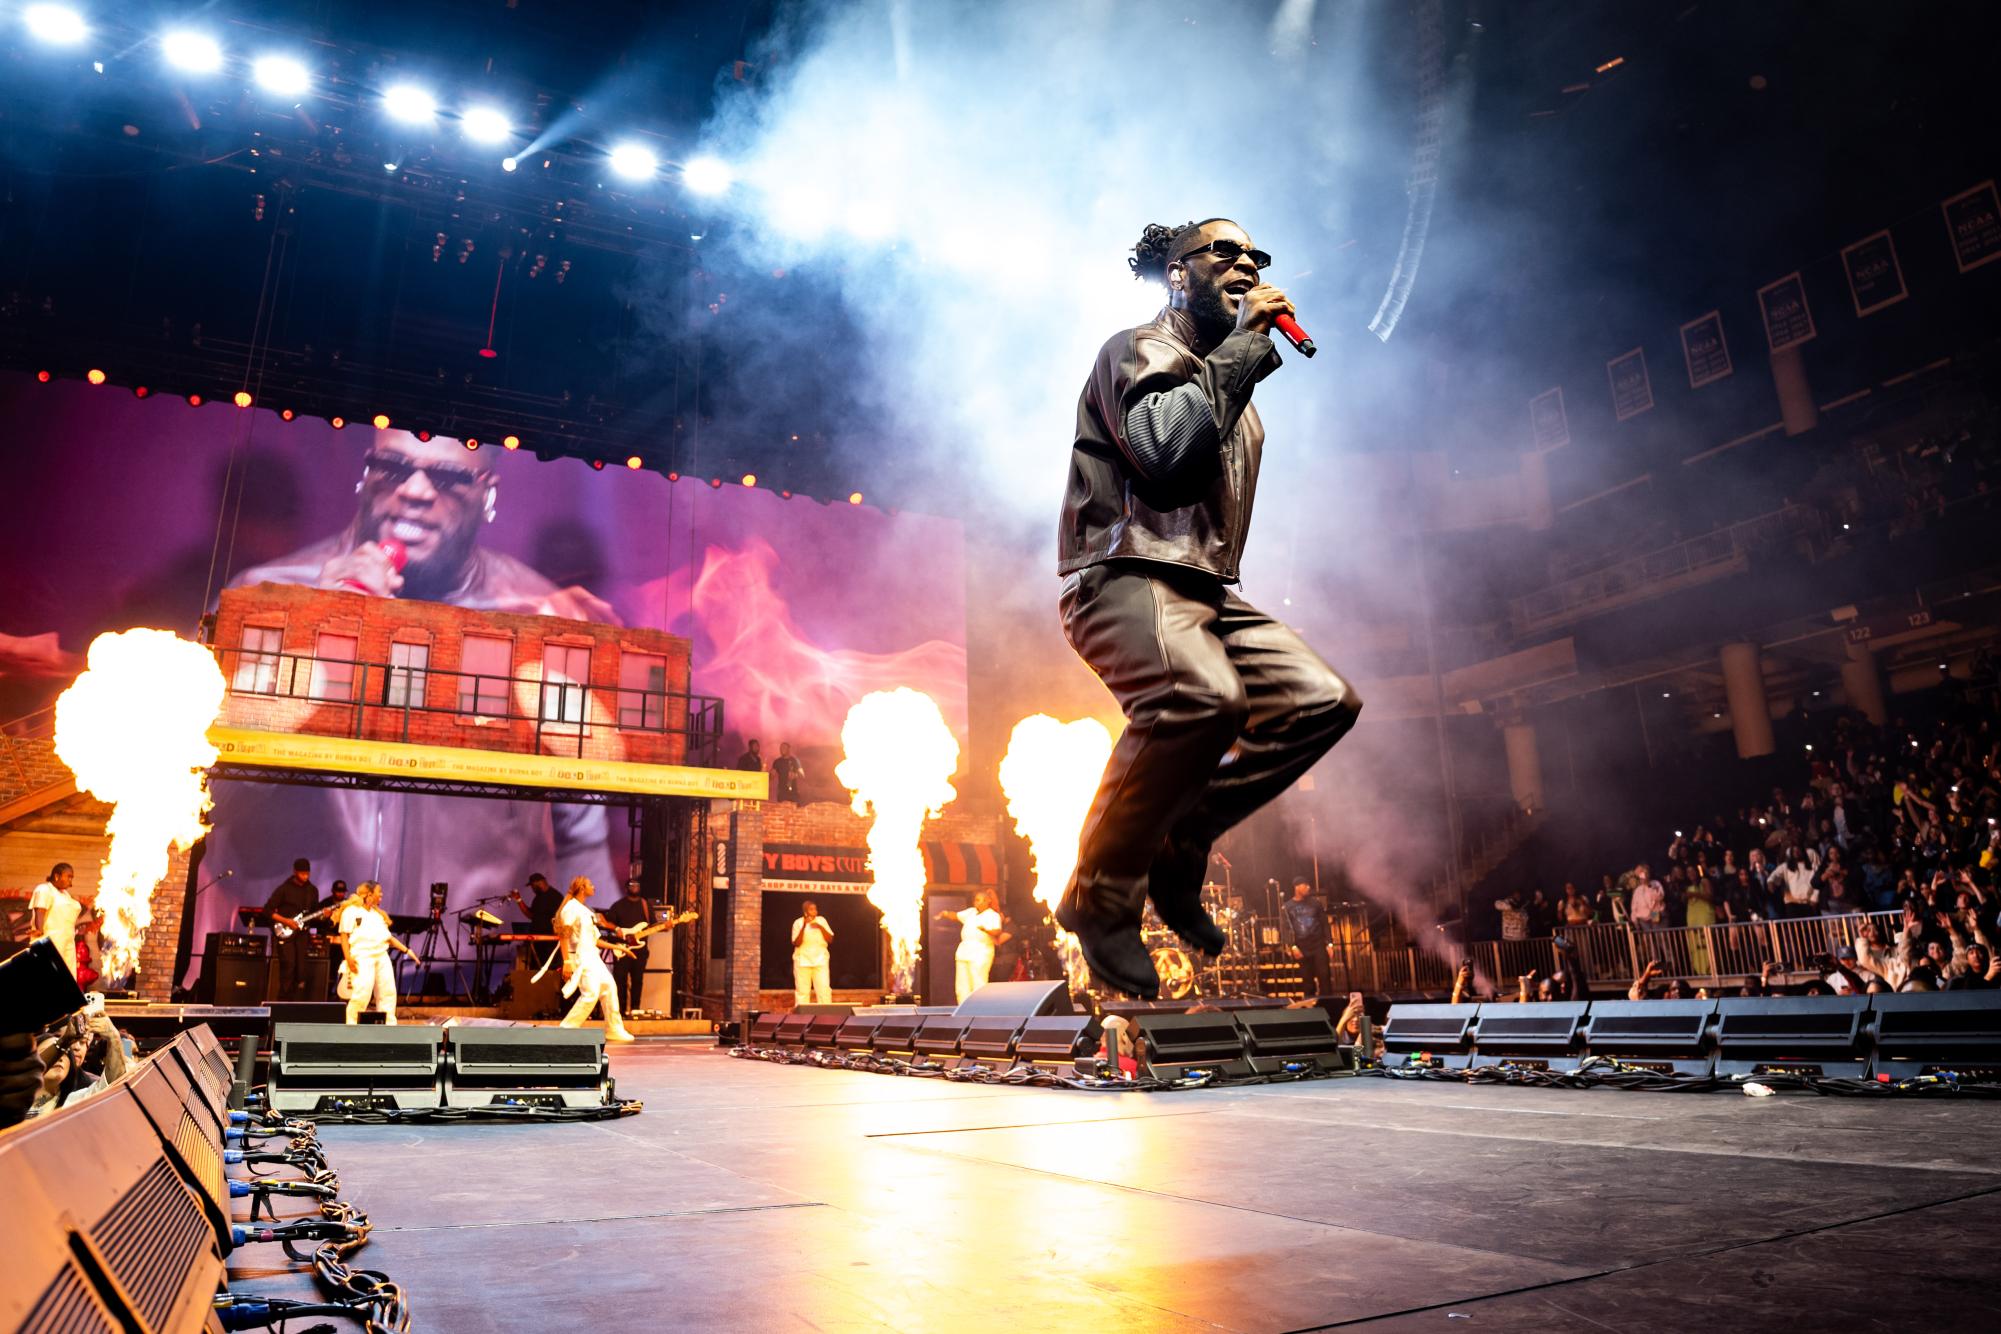 A singer wearing all black and sunglasses jumps as flames shoot up from the stage behind them.